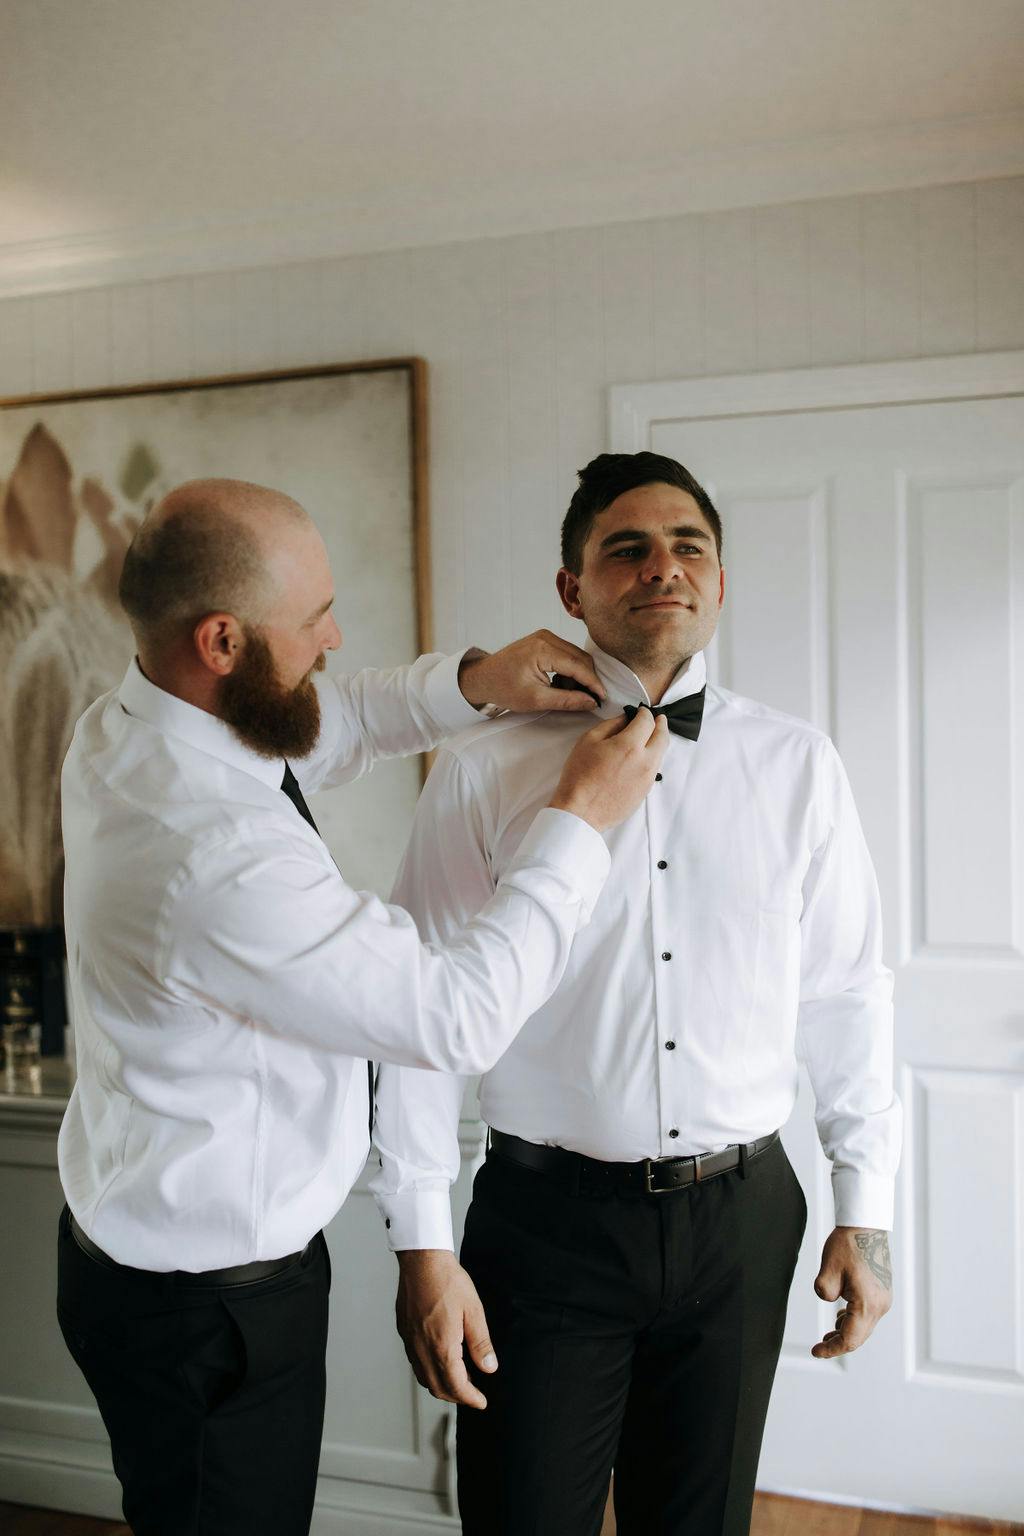 A bearded man helps another man adjust his black bow tie. Both are dressed in white shirts and black pants. They stand in a well-lit room with a white door and a painting in the background. The man being helped looks pleased as he prepares to get dressed.